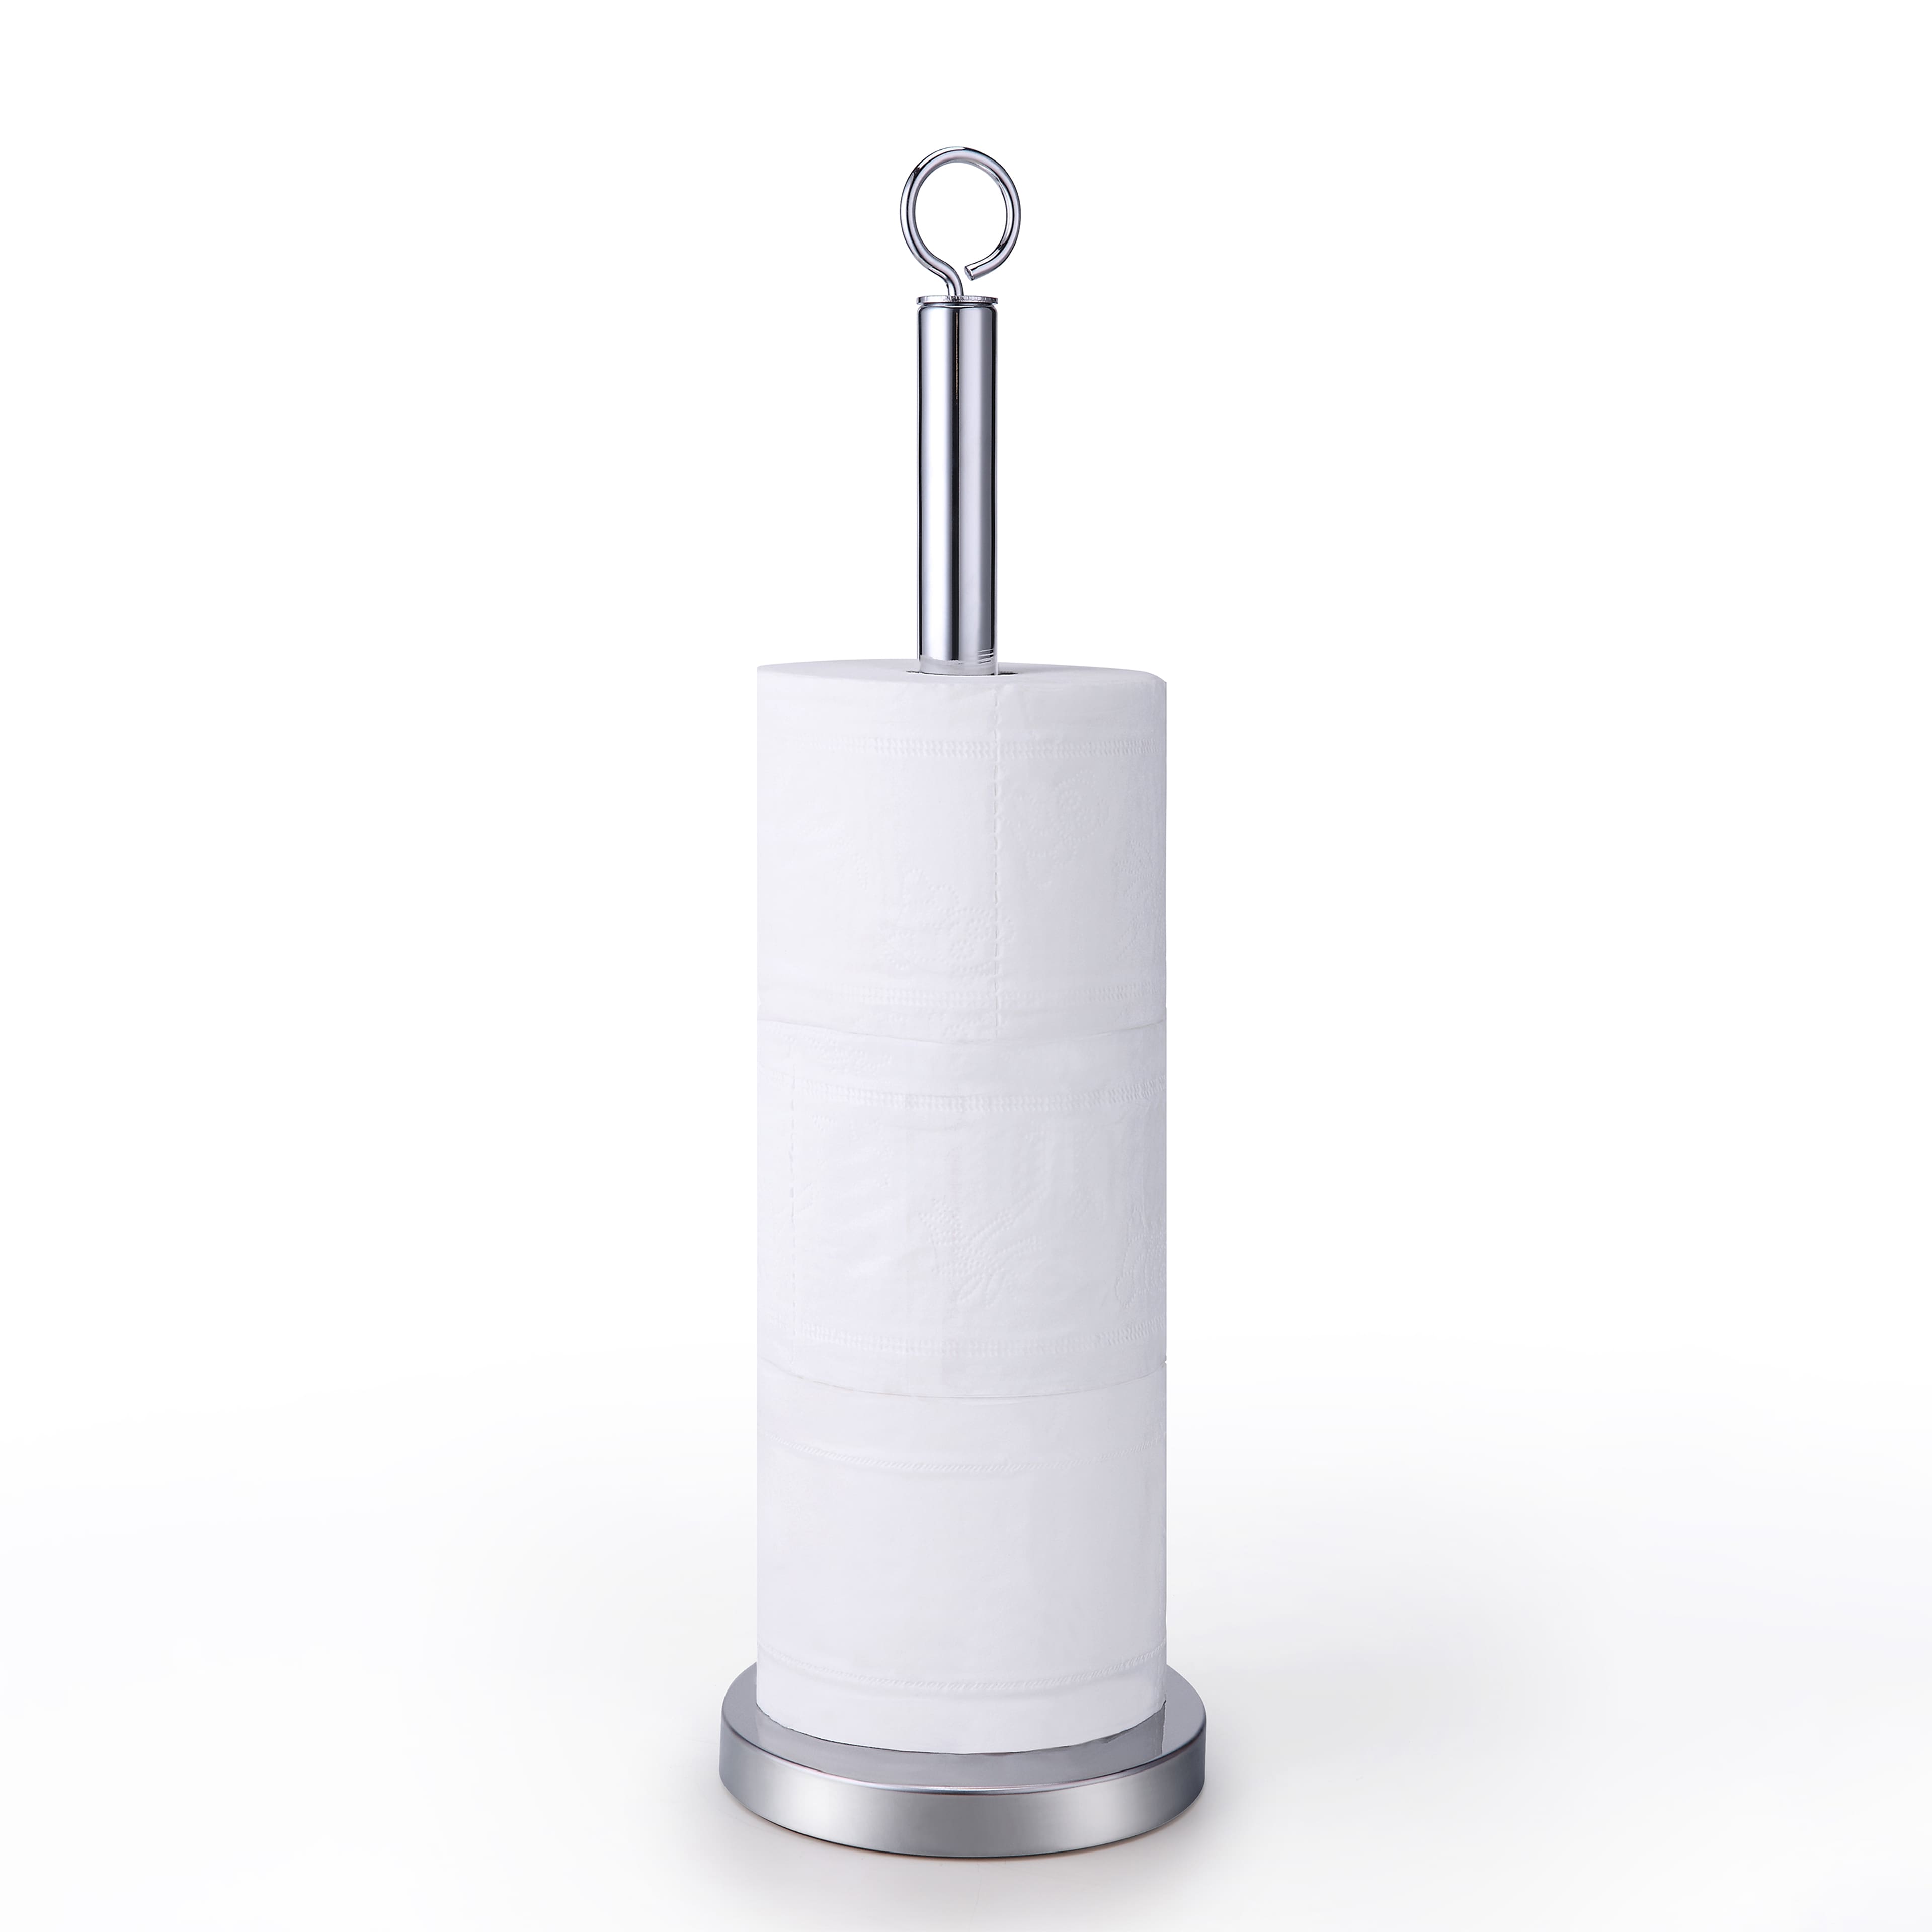 Leifheit Wall Mount Paper Towel Holder with Spice Rack - White